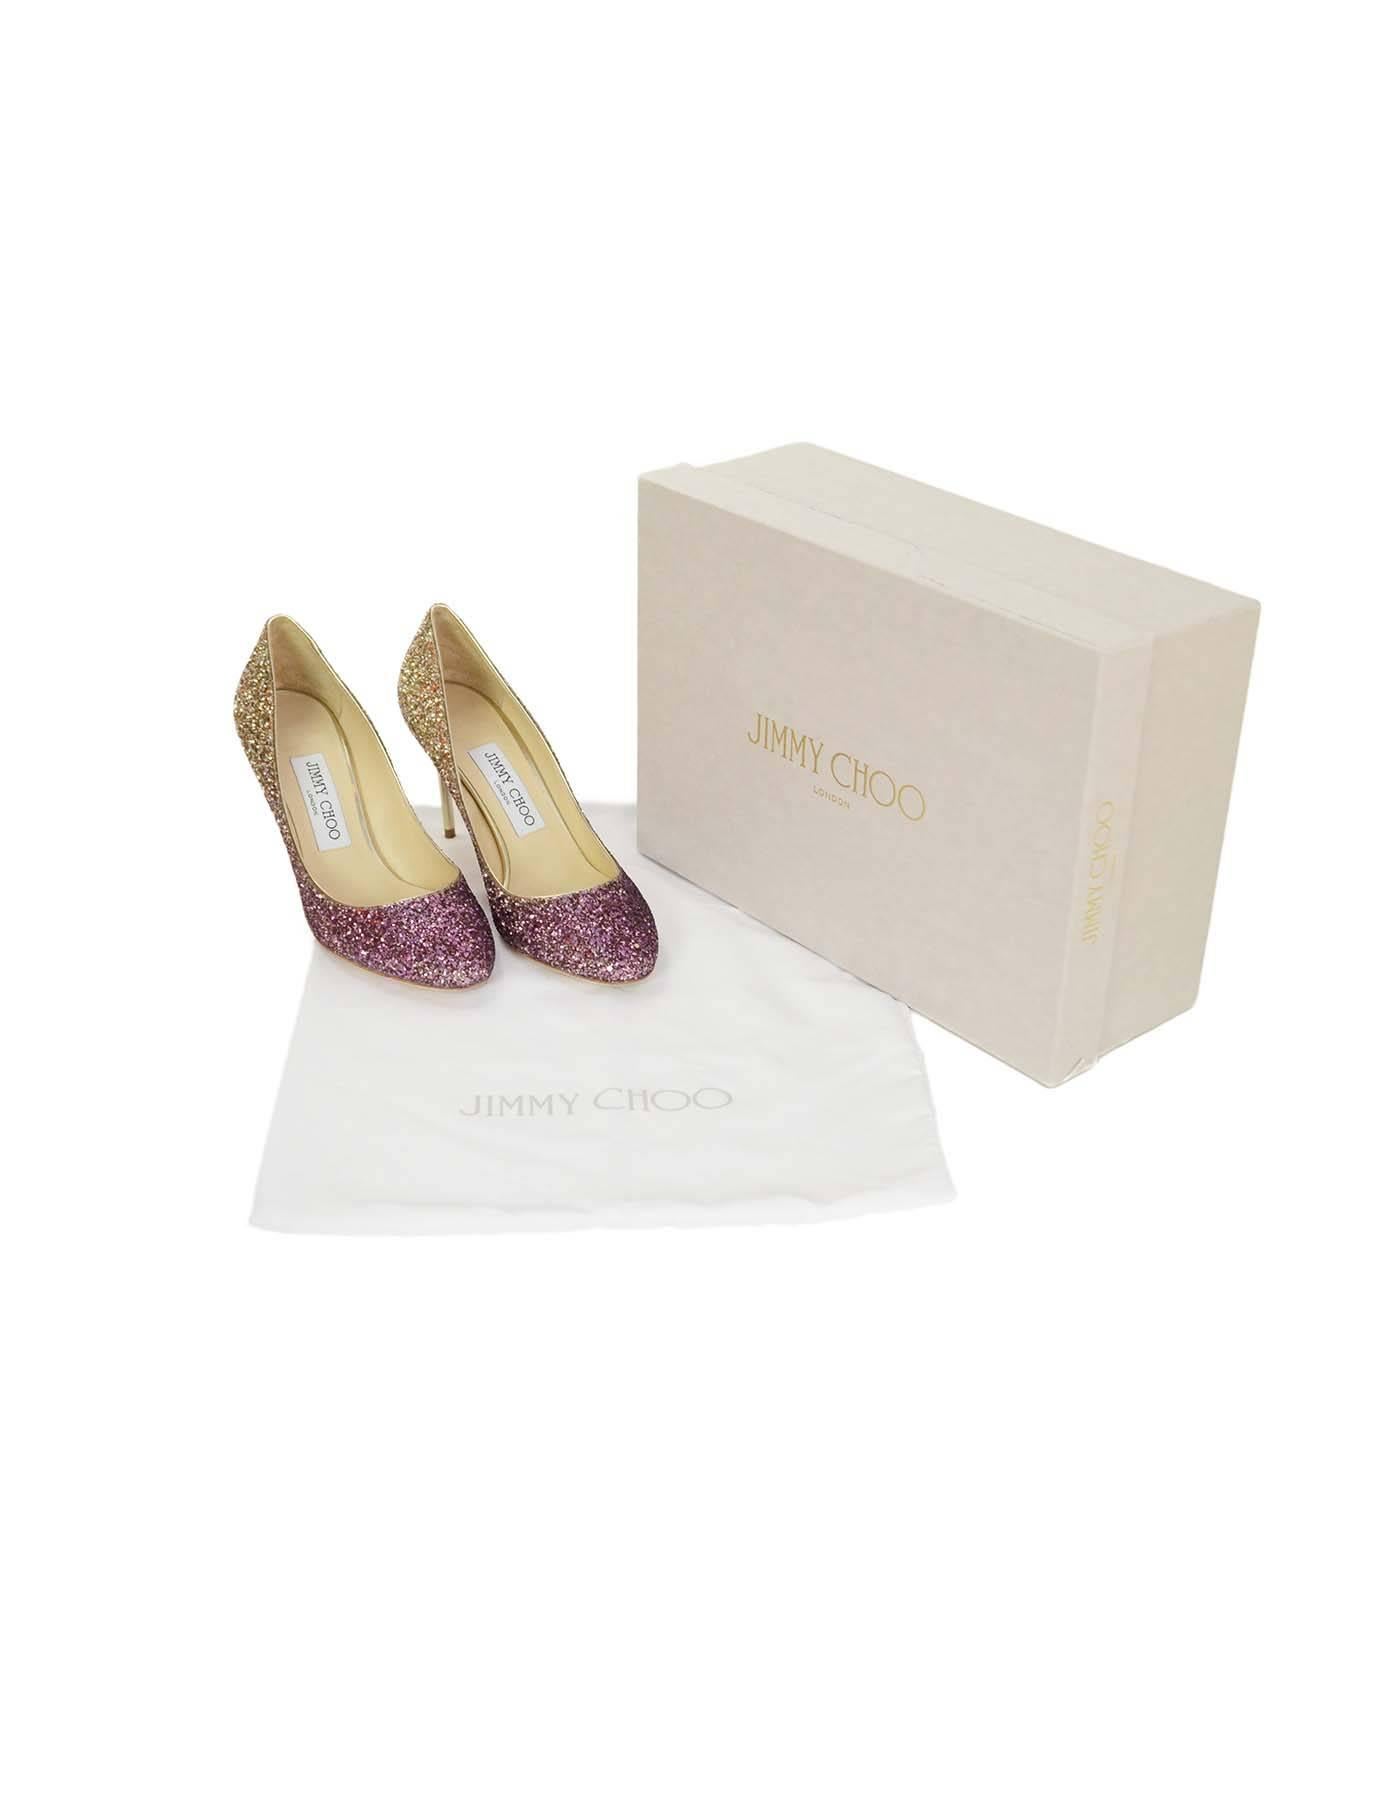 Women's Jimmy Choo Esme Gold and Pink Ombre Glitter Pumps Sz 36